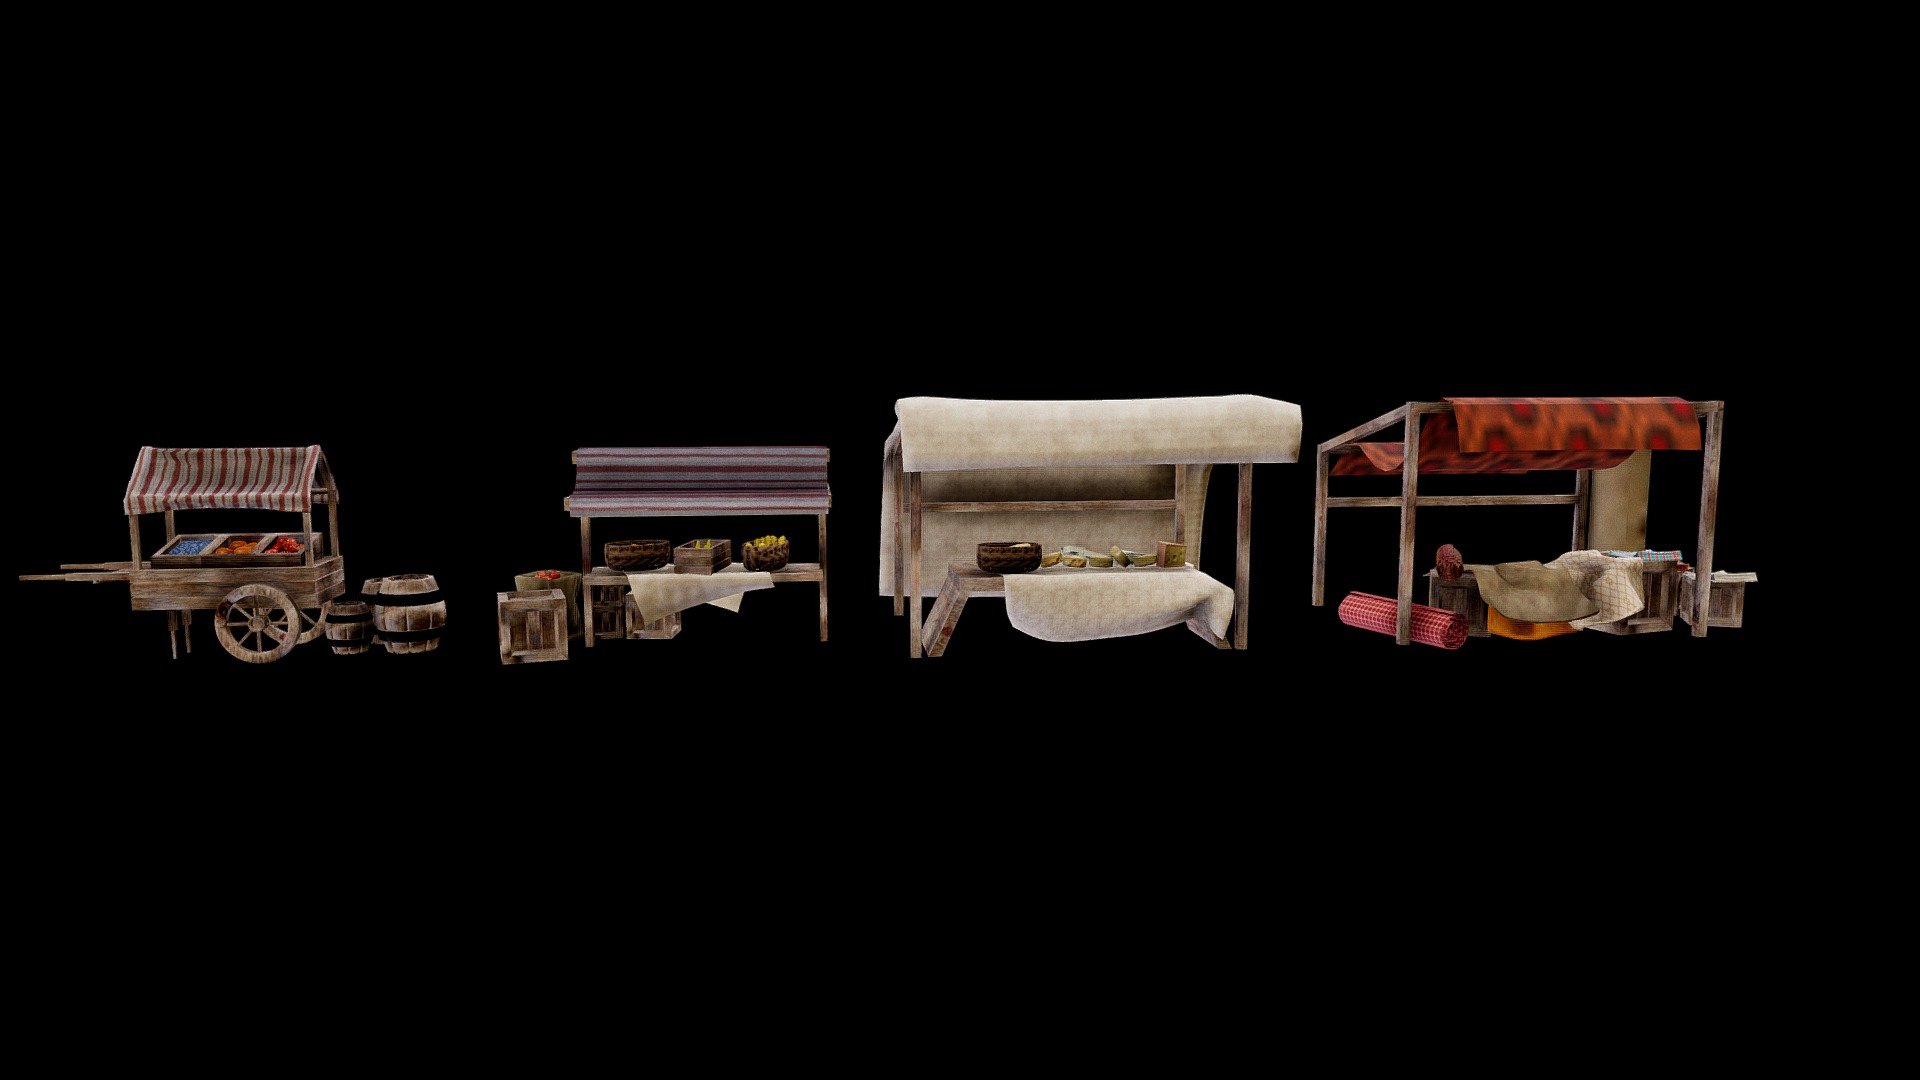 3D models of medieval-style market stands that are perfect for selling fruits, cheese, and carpets 3d model